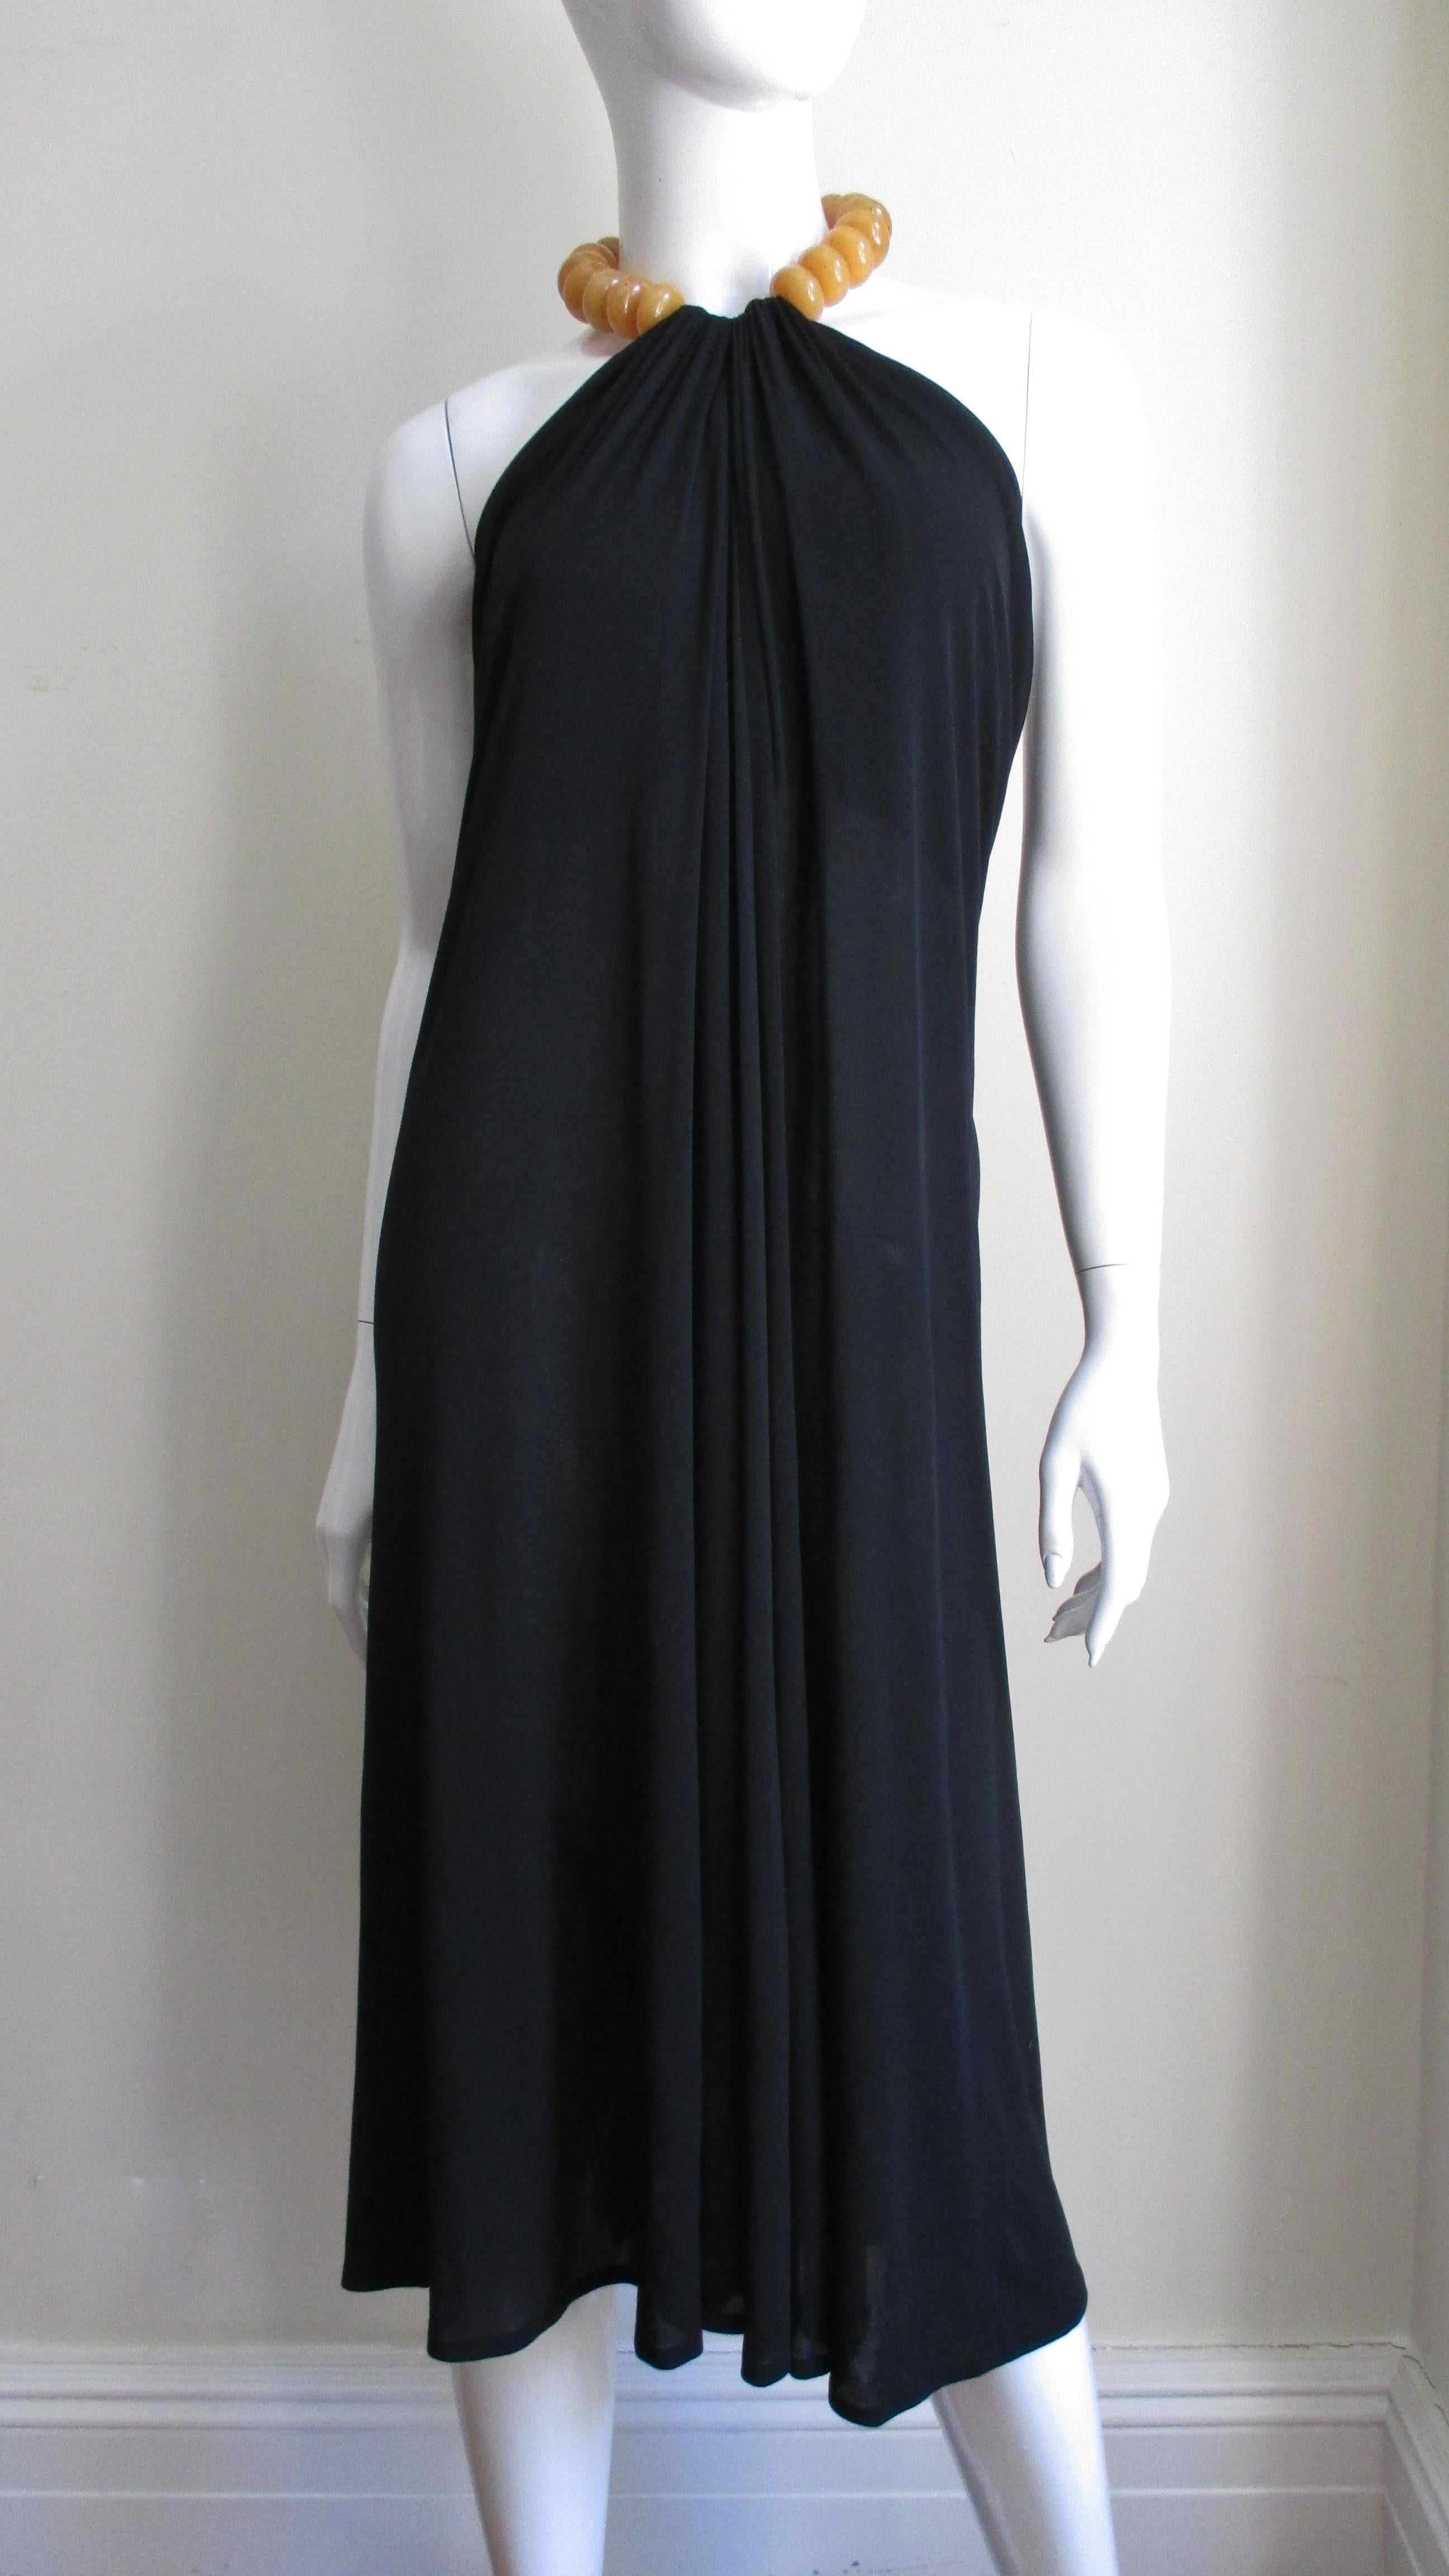 A simple elegant black fine jersey halter dress from Alexander McQueen.  The dress drapes in the front from an adjustable collar of large butterscotch colored beads alternating with small silver metal ball beads with a back toggle closure.  The